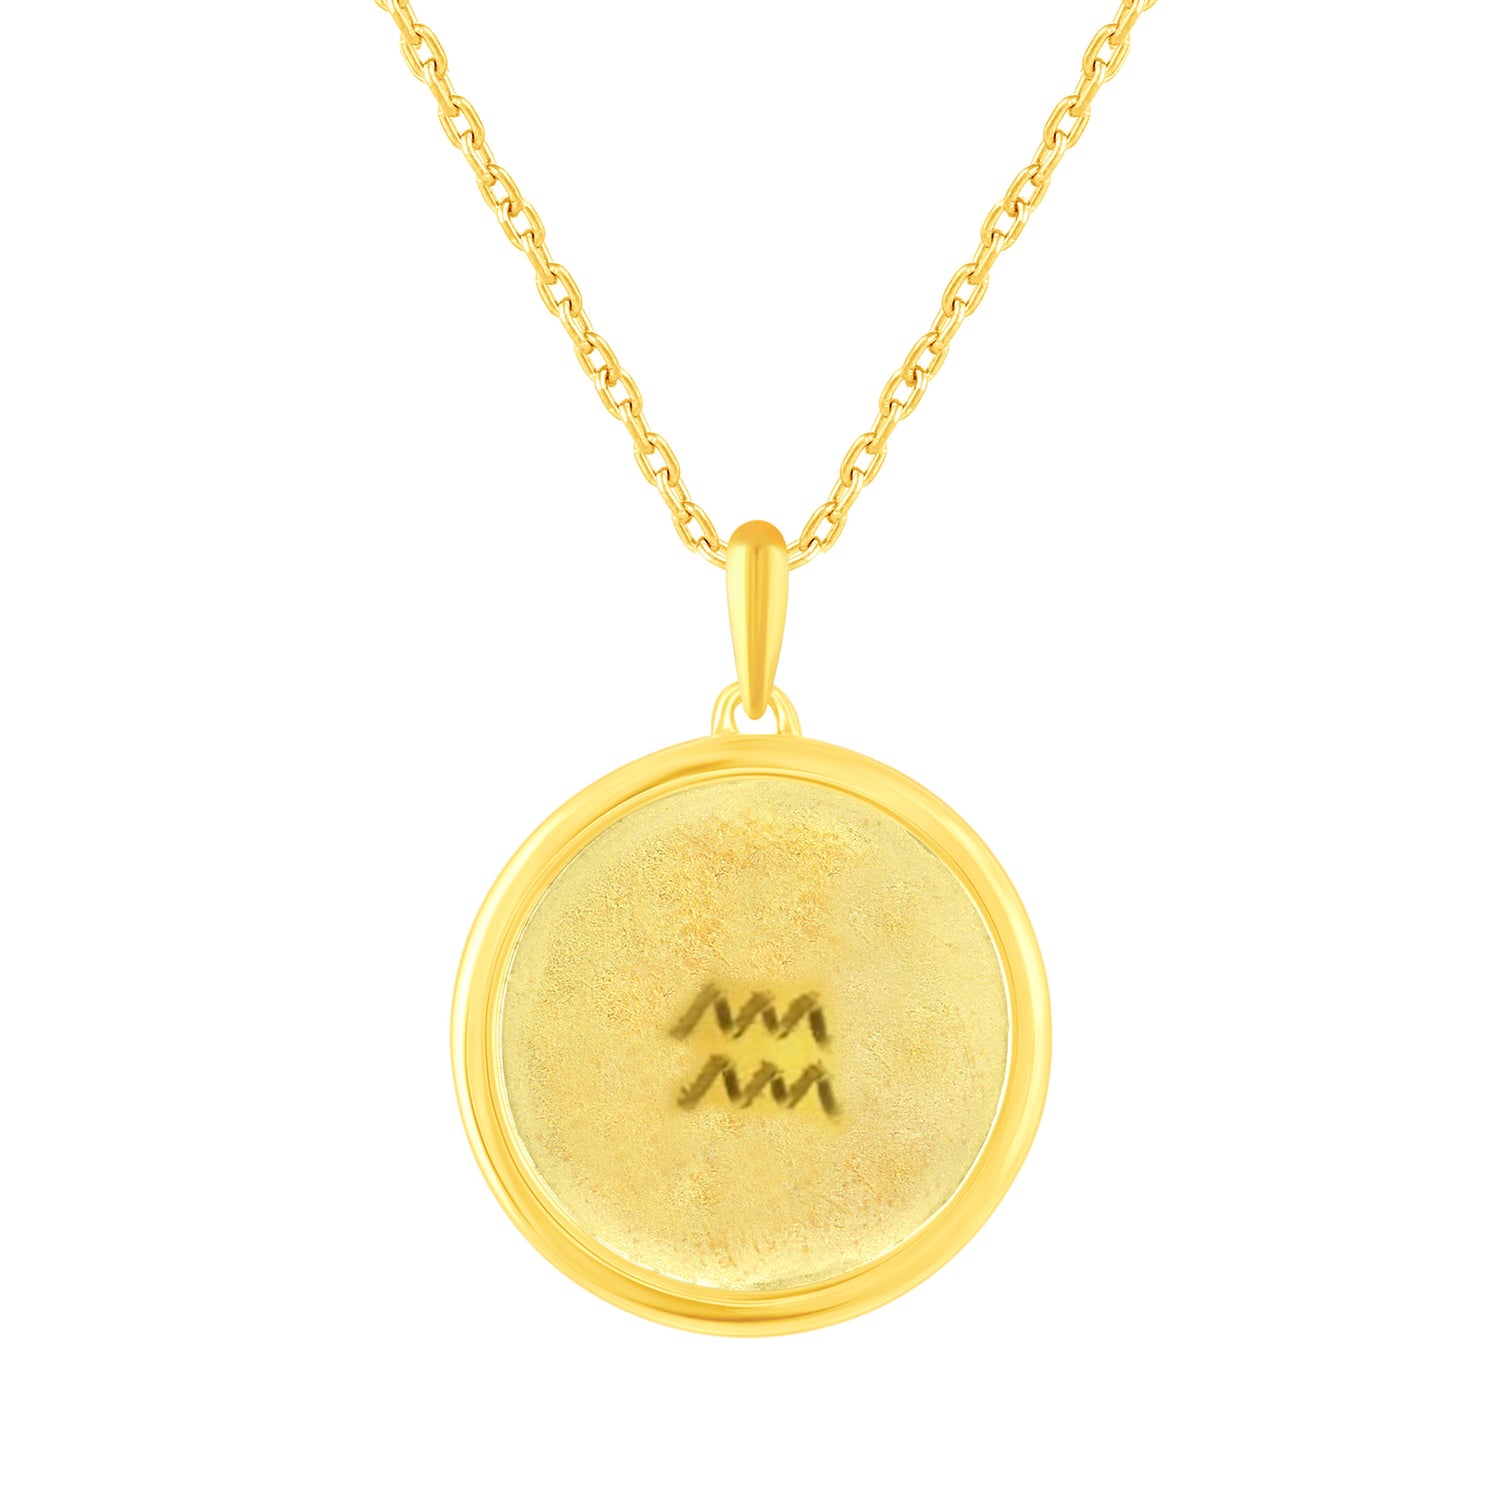 1/20 Cttw Diamond Aquarius Zodiac Pendant Necklace set in 925 Sterling Silver 14K Yellow Gold Plating